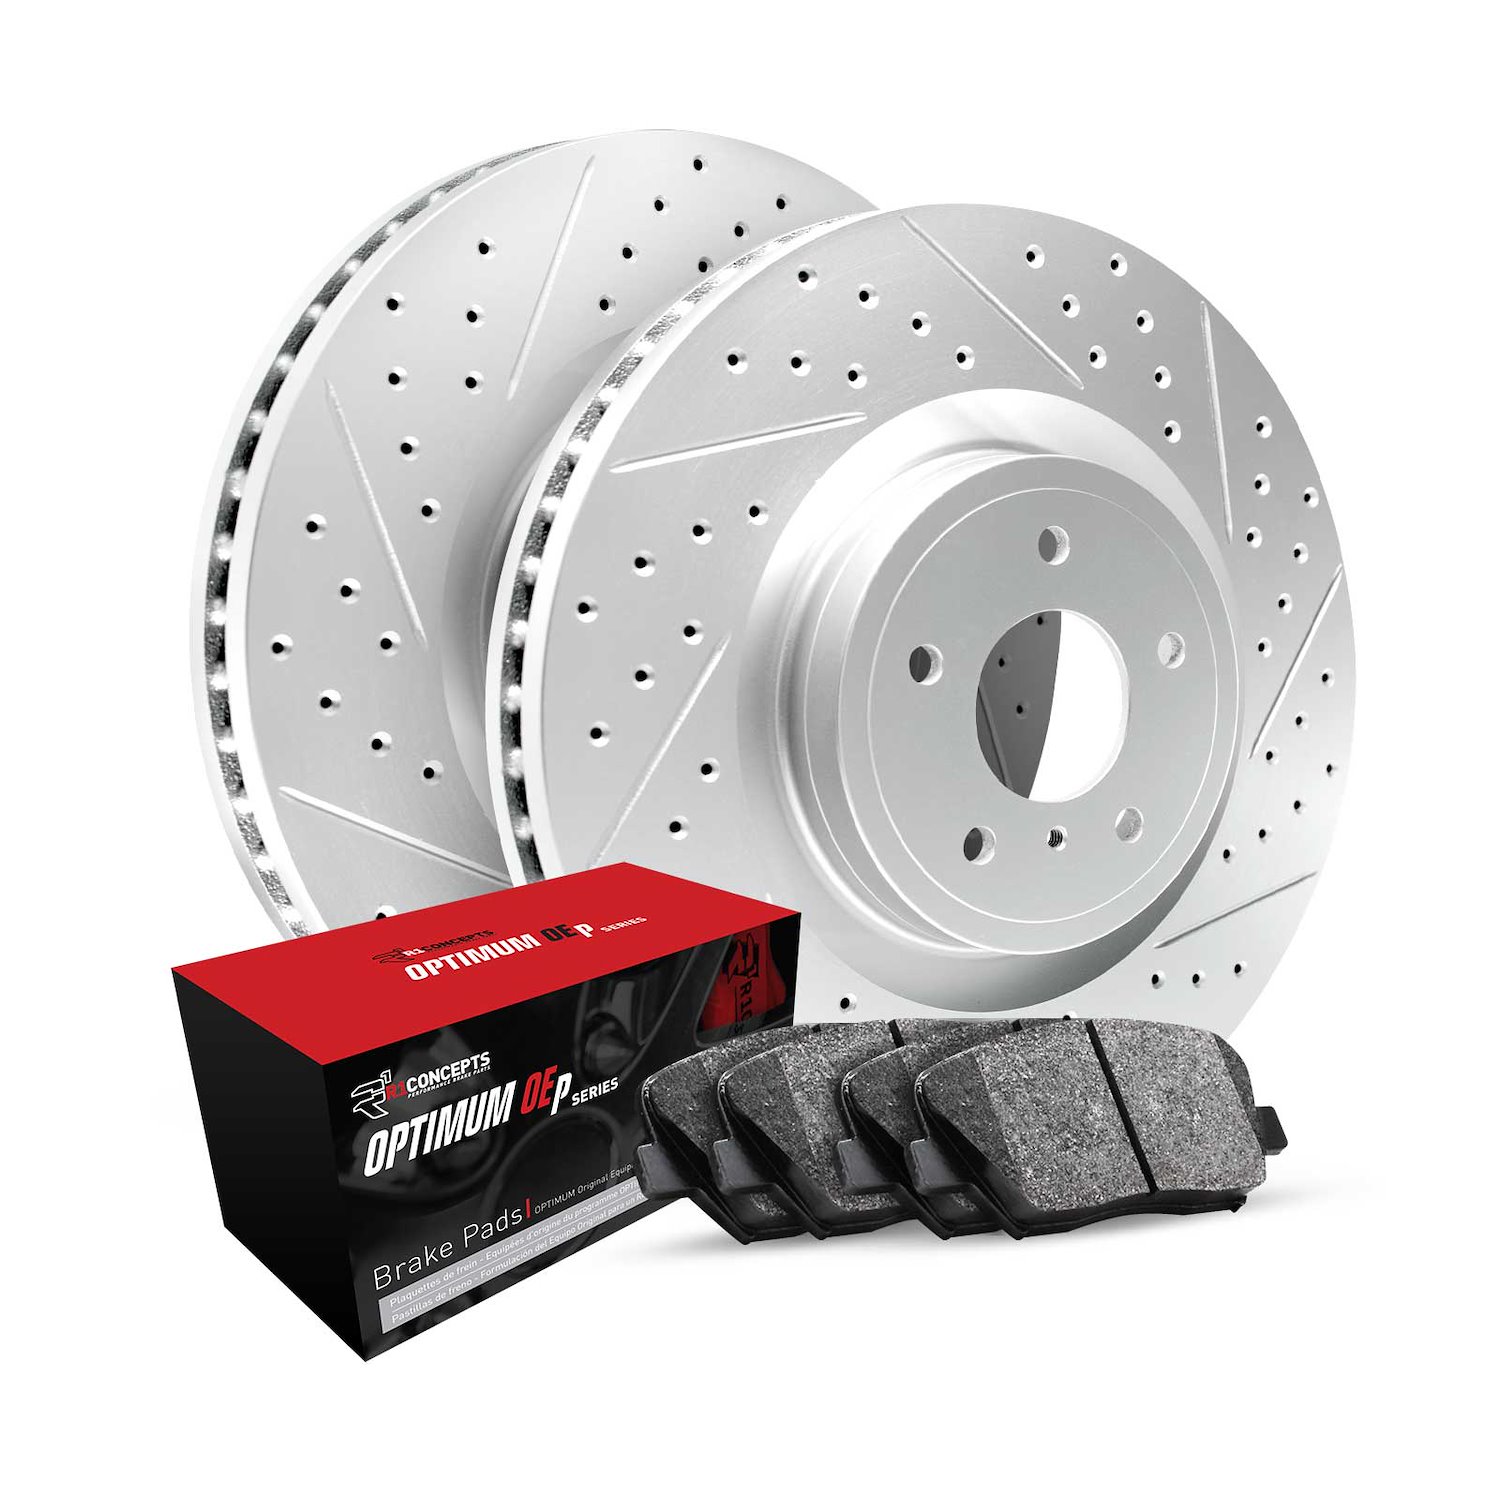 GEO-Carbon Drilled/Slotted Rotors w/Optimum OE Pads, 2002-2006 Fits Multiple Makes/Models, Position: Rear